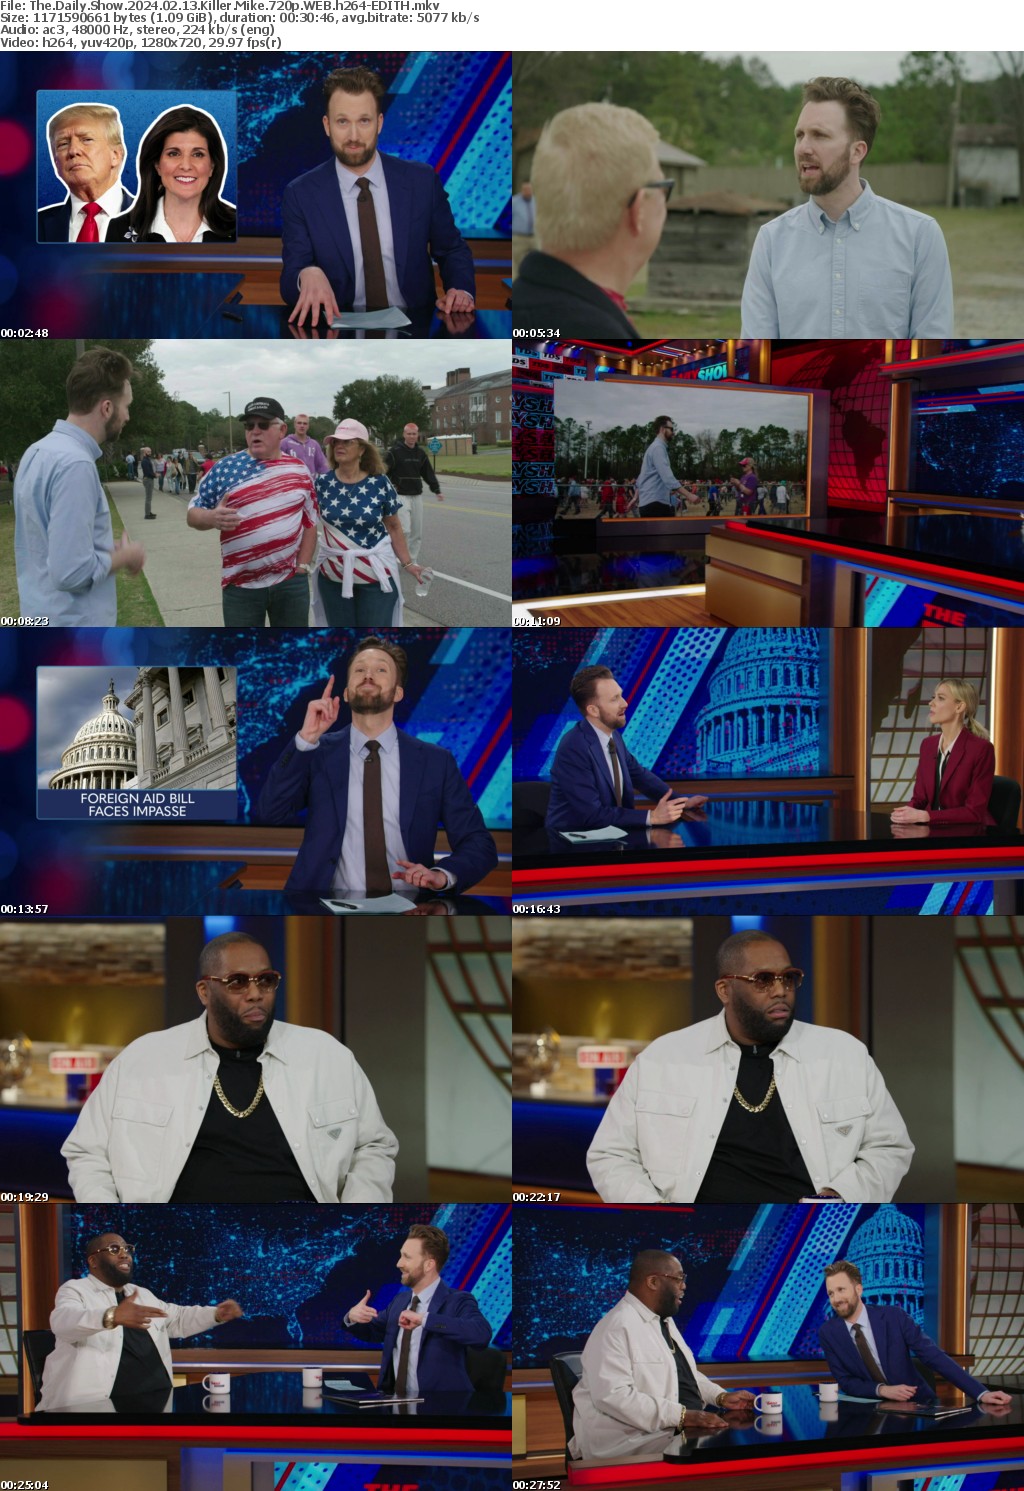 The Daily Show 2024 02 13 Killer Mike 720p WEB h264-EDITH